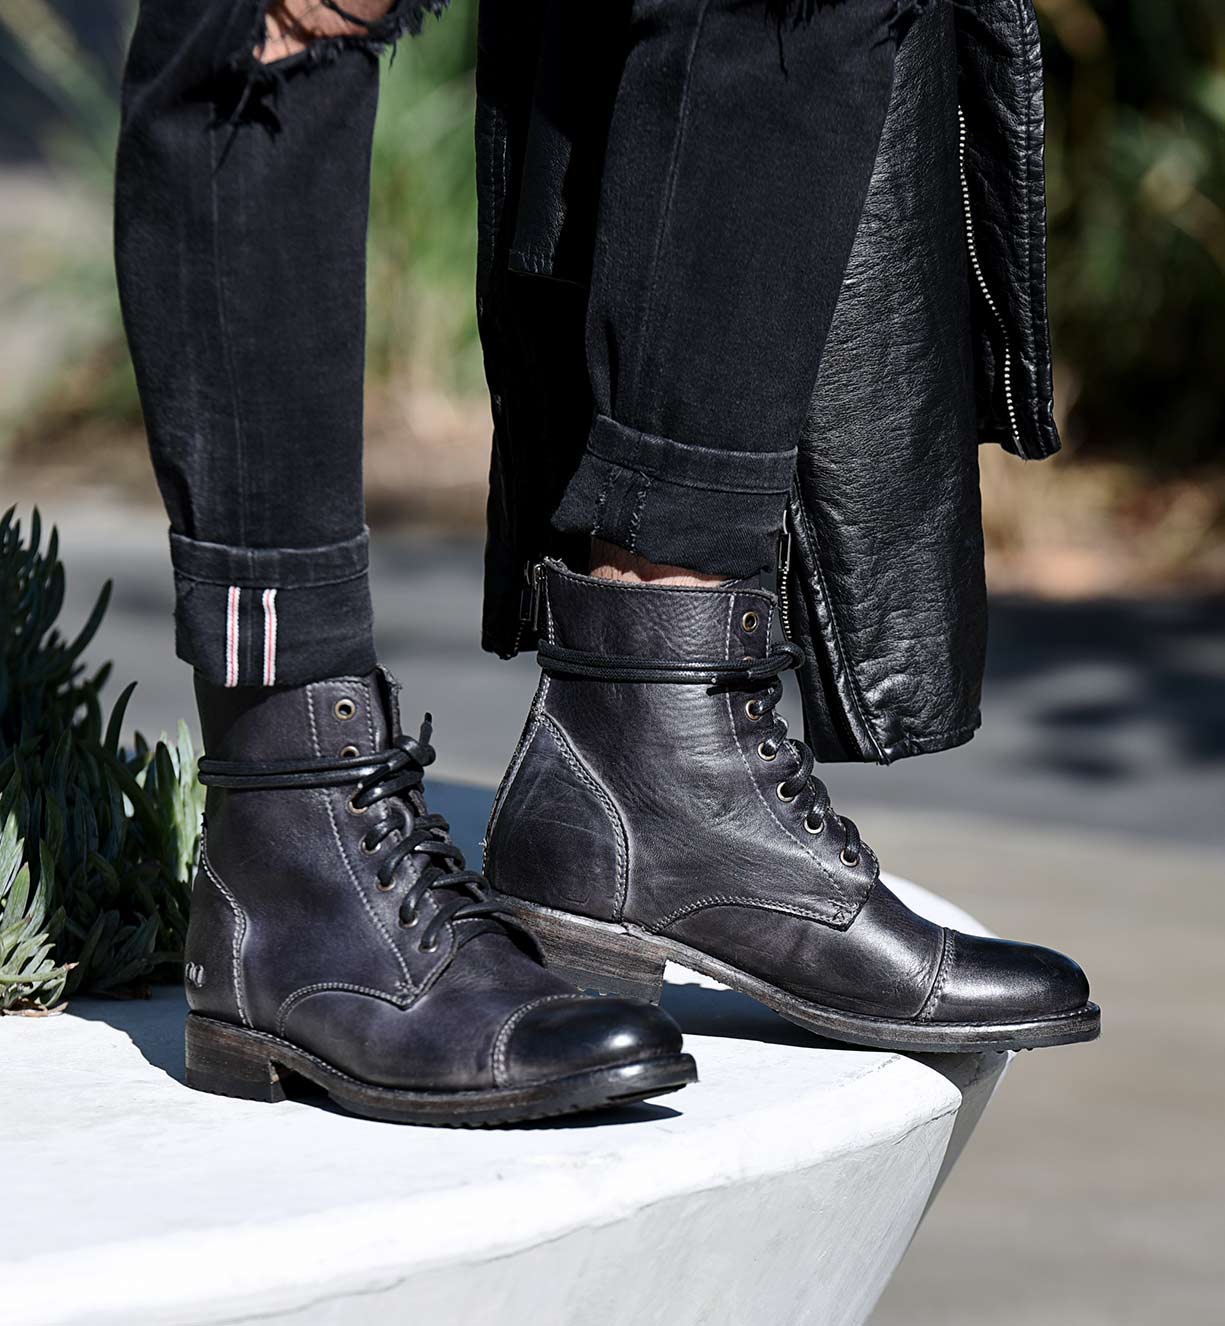 A person wearing a pair of Bed Stu Protege grey leather boots.